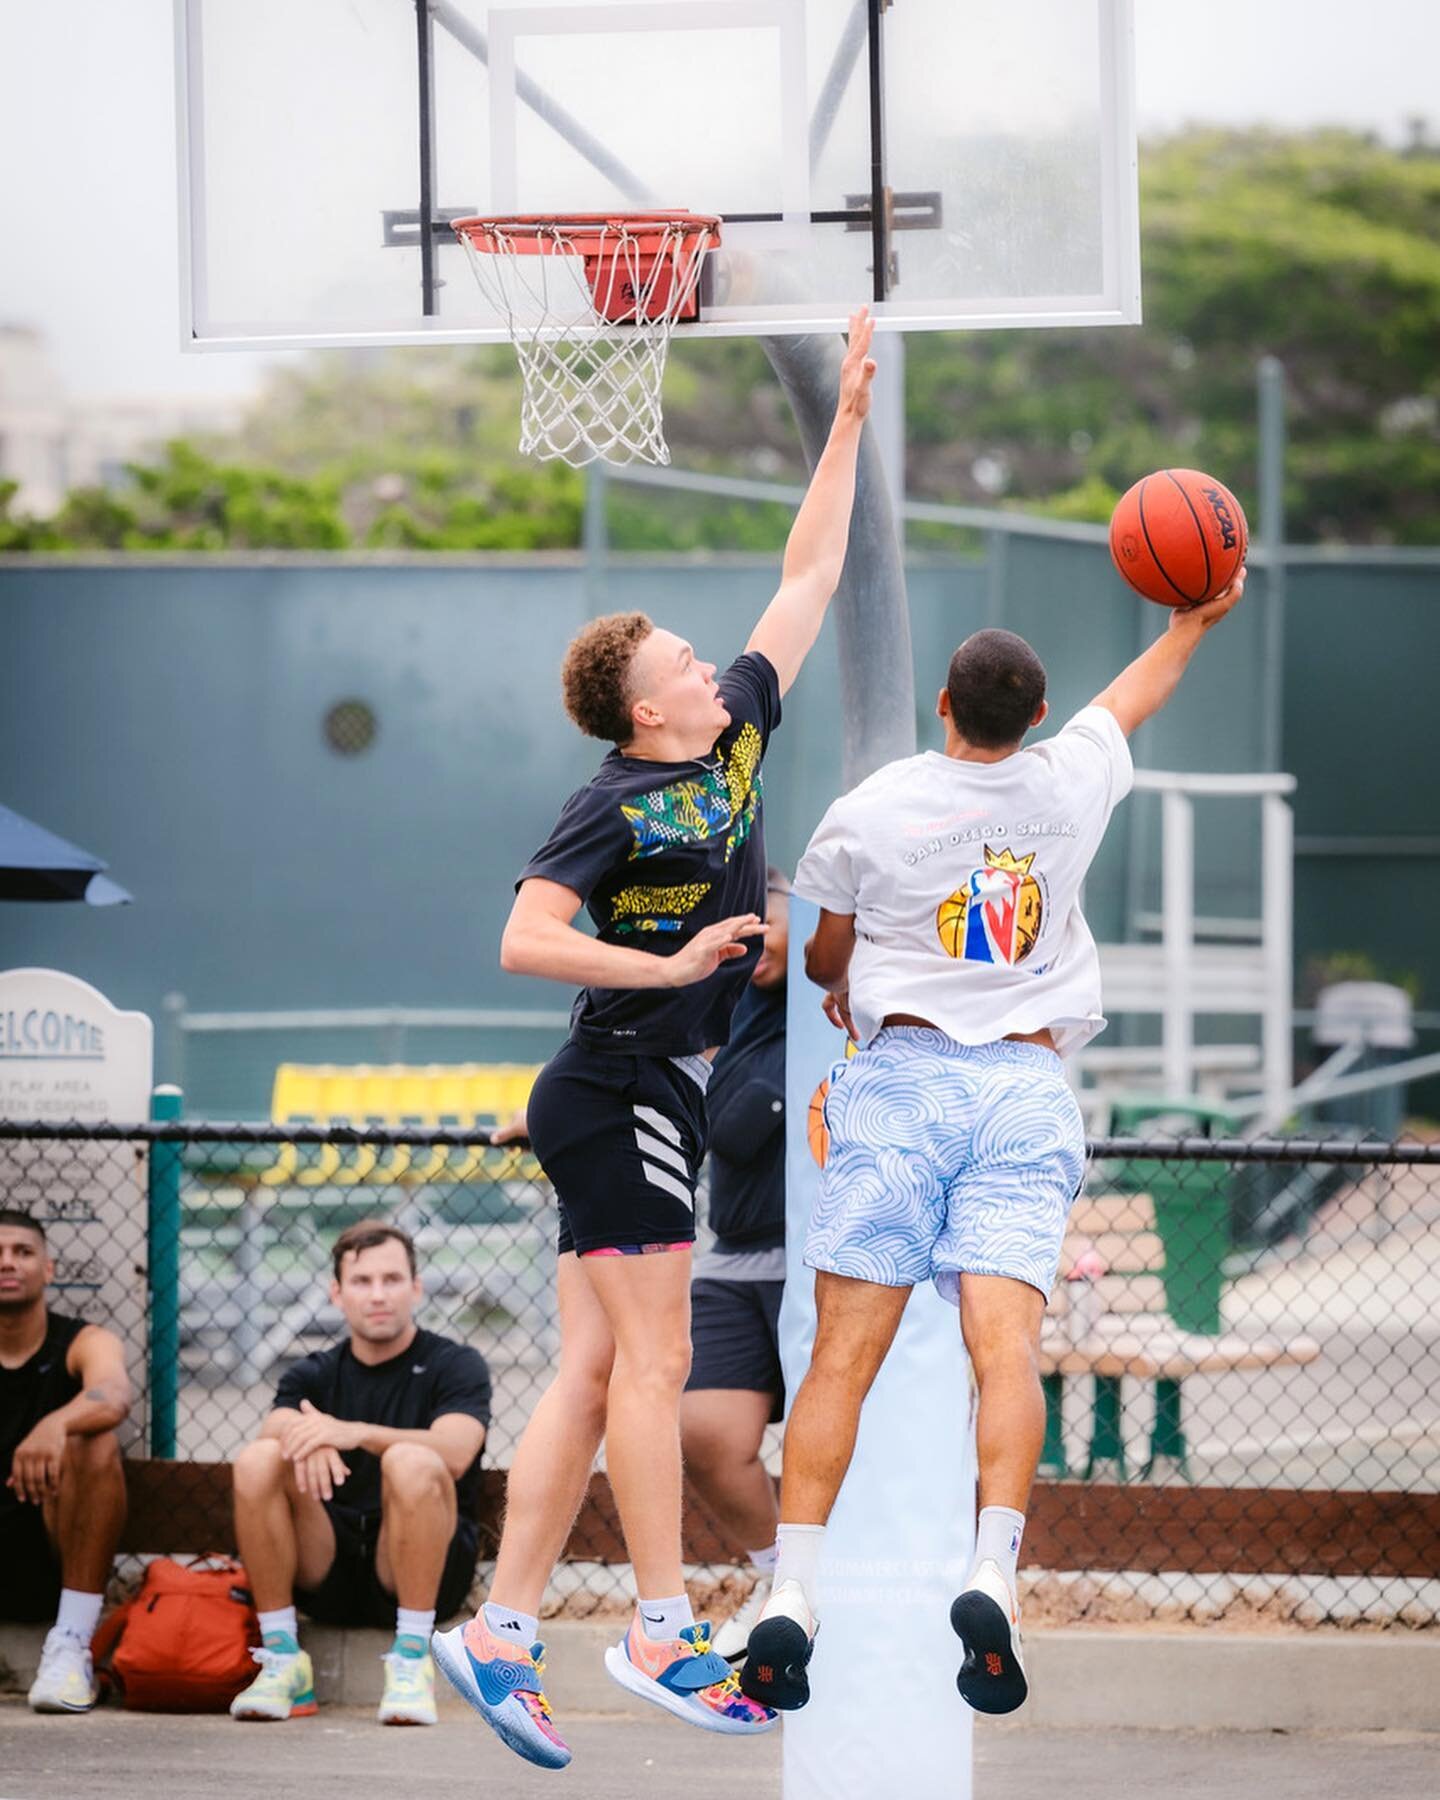 16 Teams battling for 1 Crown 👑 tag someone that you want to see represented at this year&rsquo;s #SneaksSummerClassic 🏀🏁

#5thAnnual #BasketballTournament #CommunityEvent #5on5 #Basketball #SanDiego